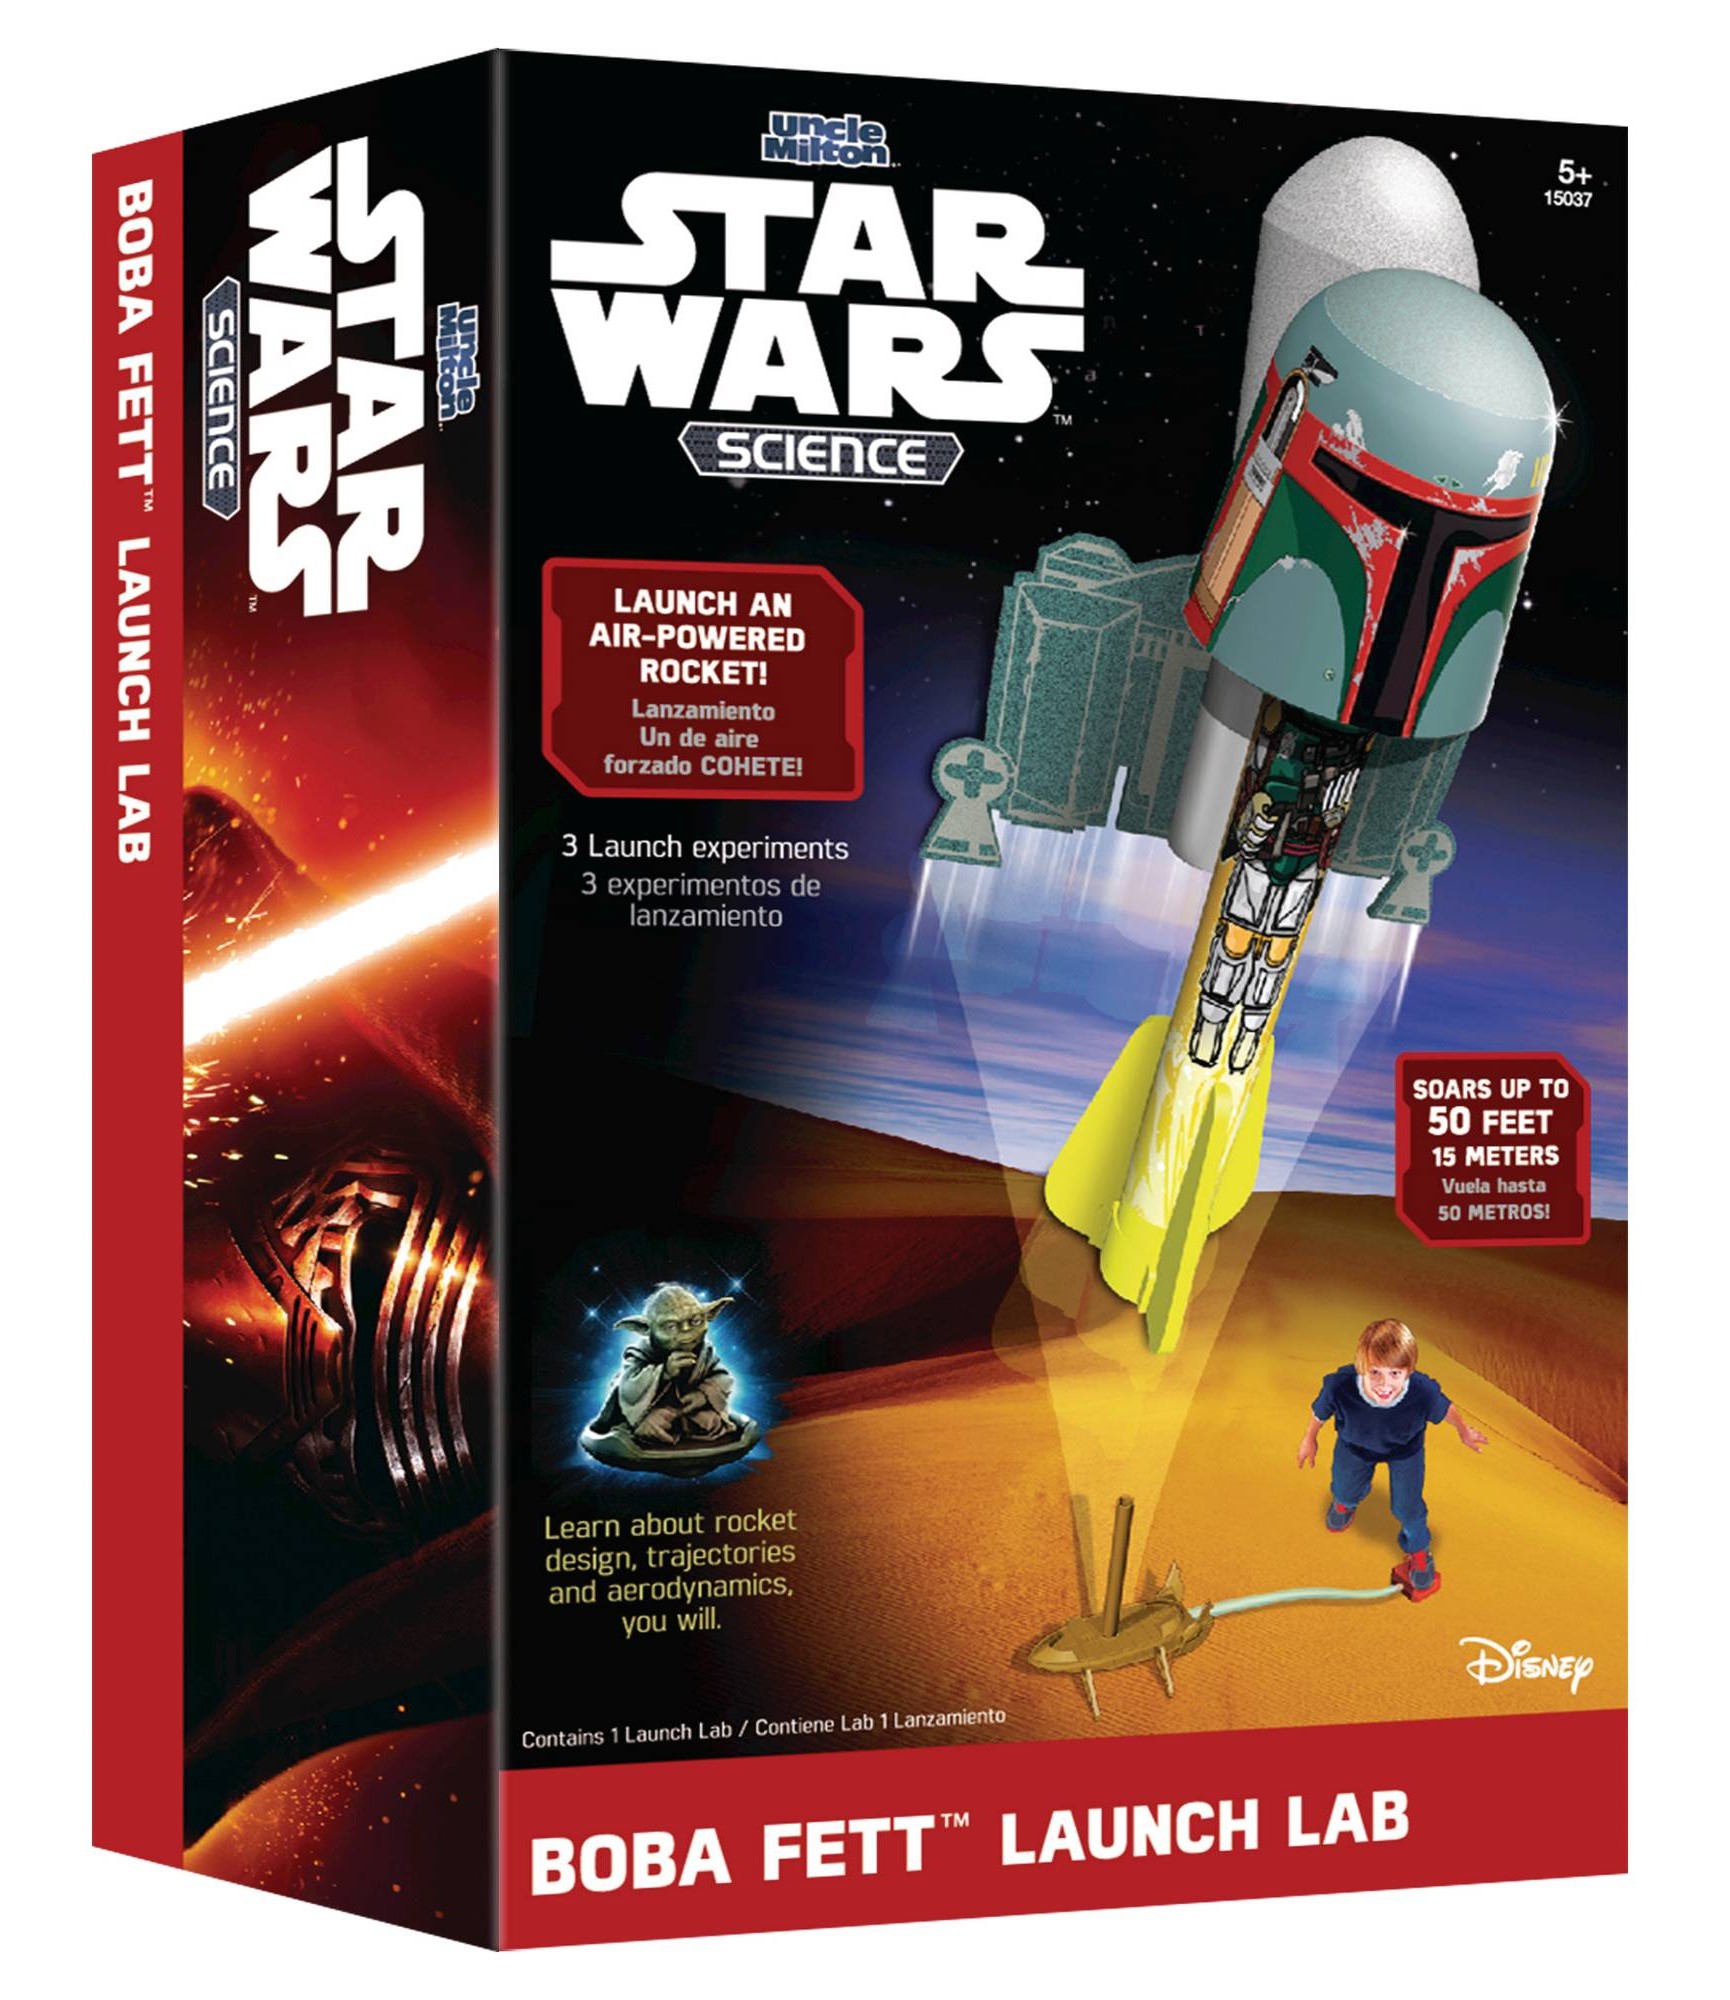 New Star Wars Science Boba Fett Air Powered Rocket Launch Lab available